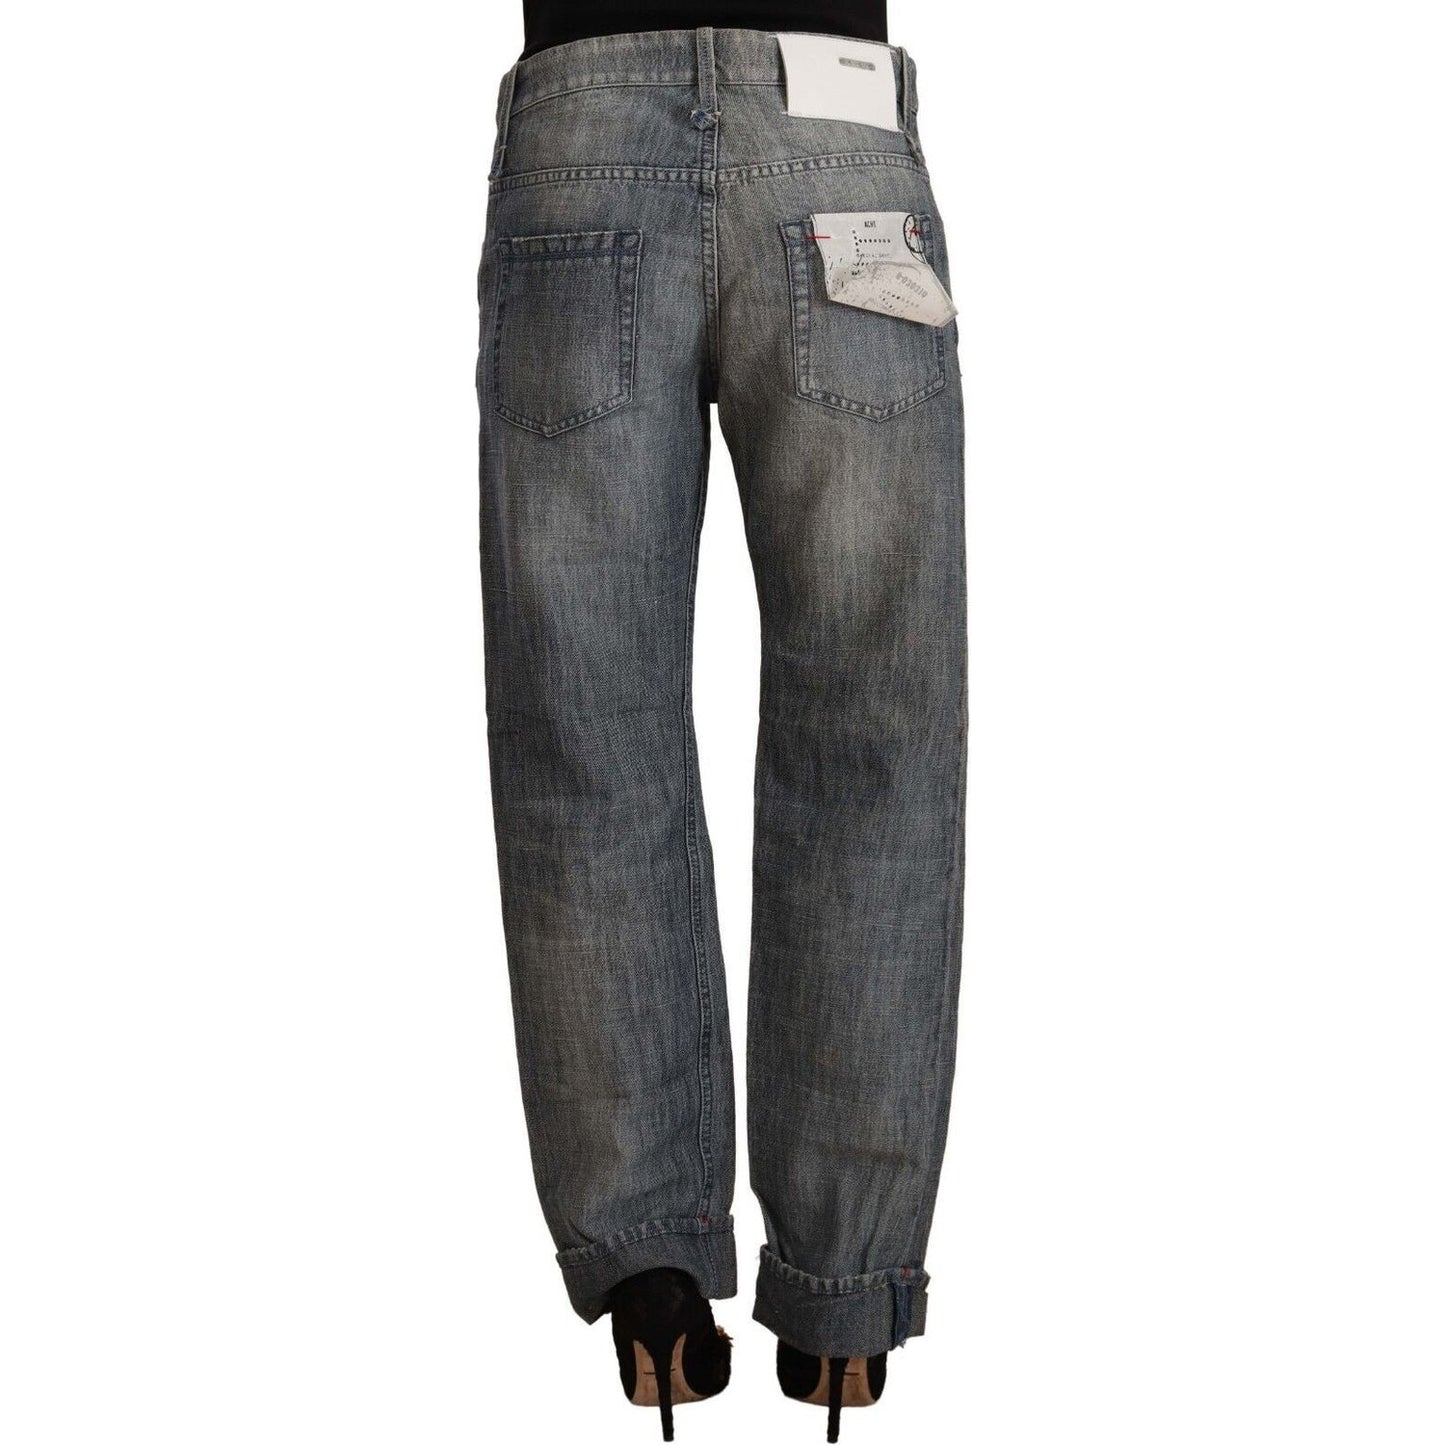 Acht Chic Gray Washed Straight Cut Jeans gray-washed-mid-waist-straight-denim-folded-hem-jeans